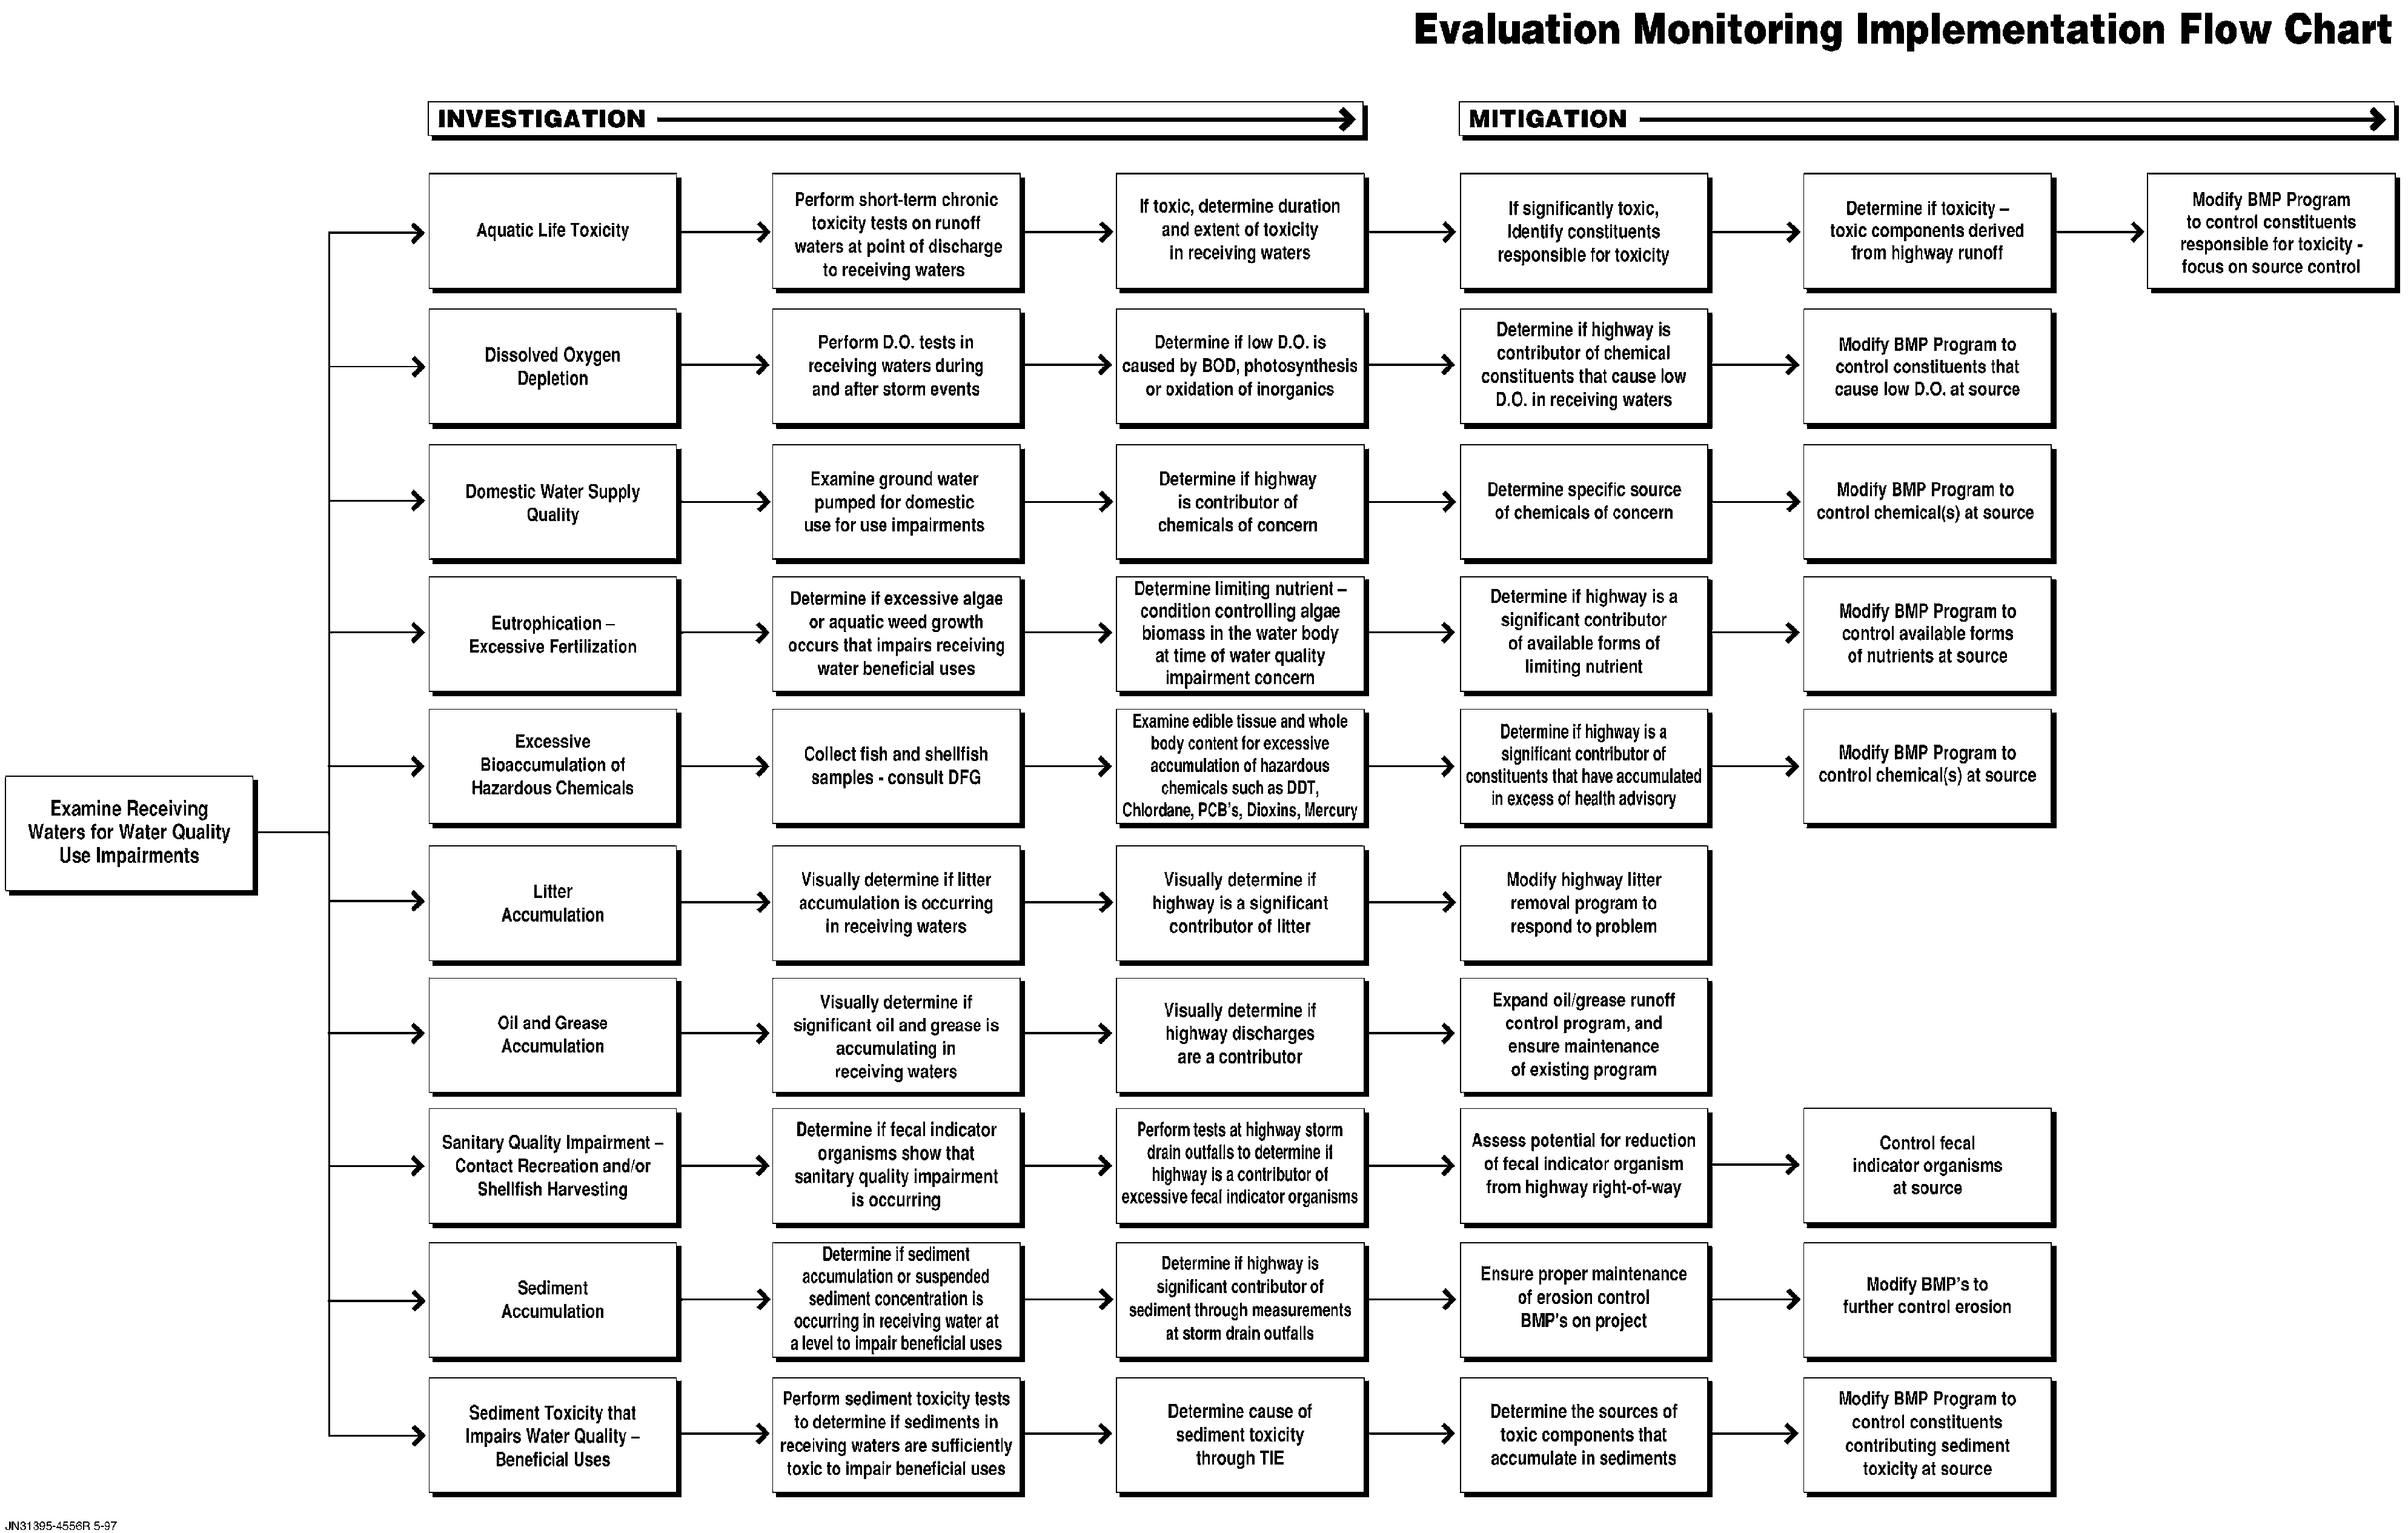 Evaluation Monitoring flow chart